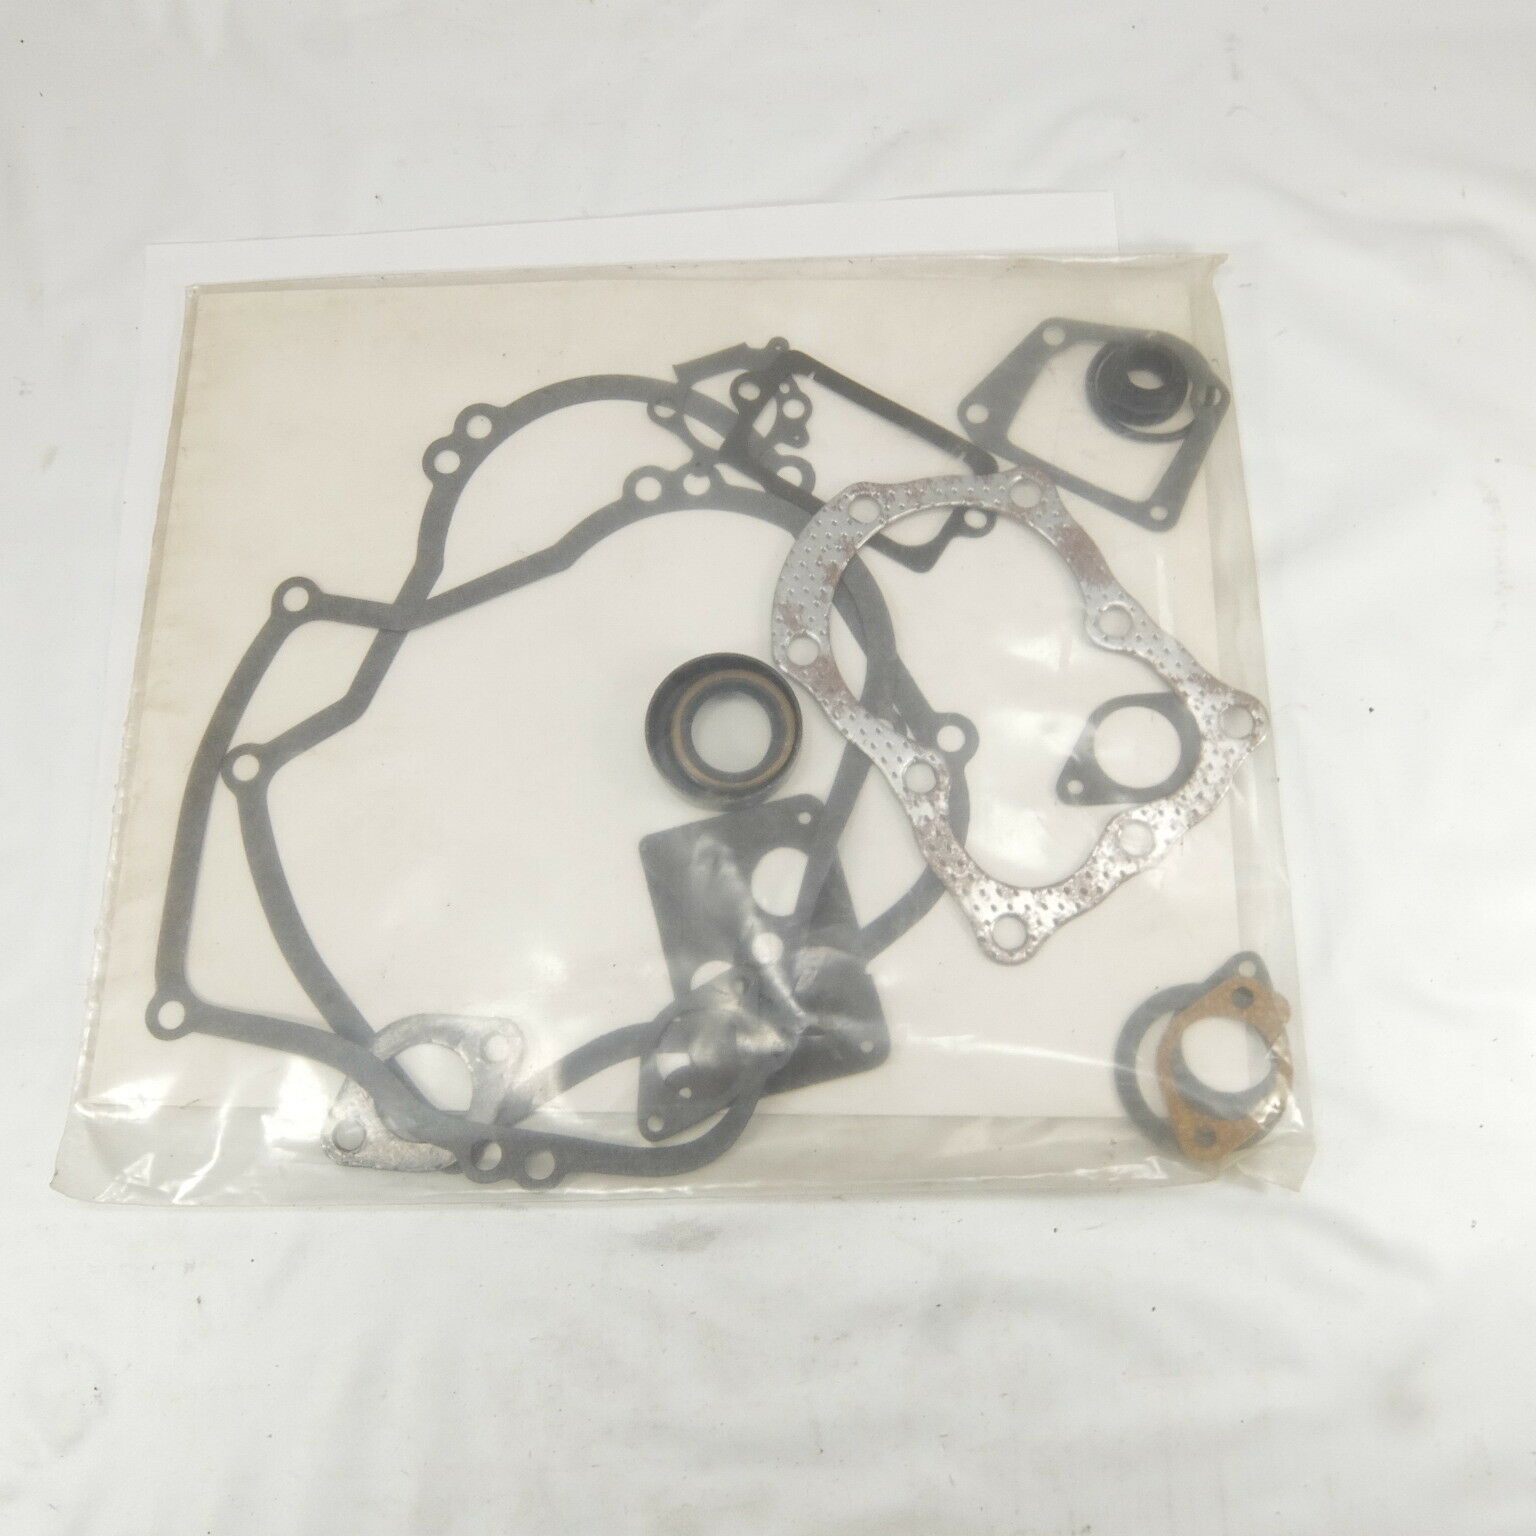 Stens 480-042 Rebuild Gasket Set replaces Briggs and Stratton 496659 - $1.50